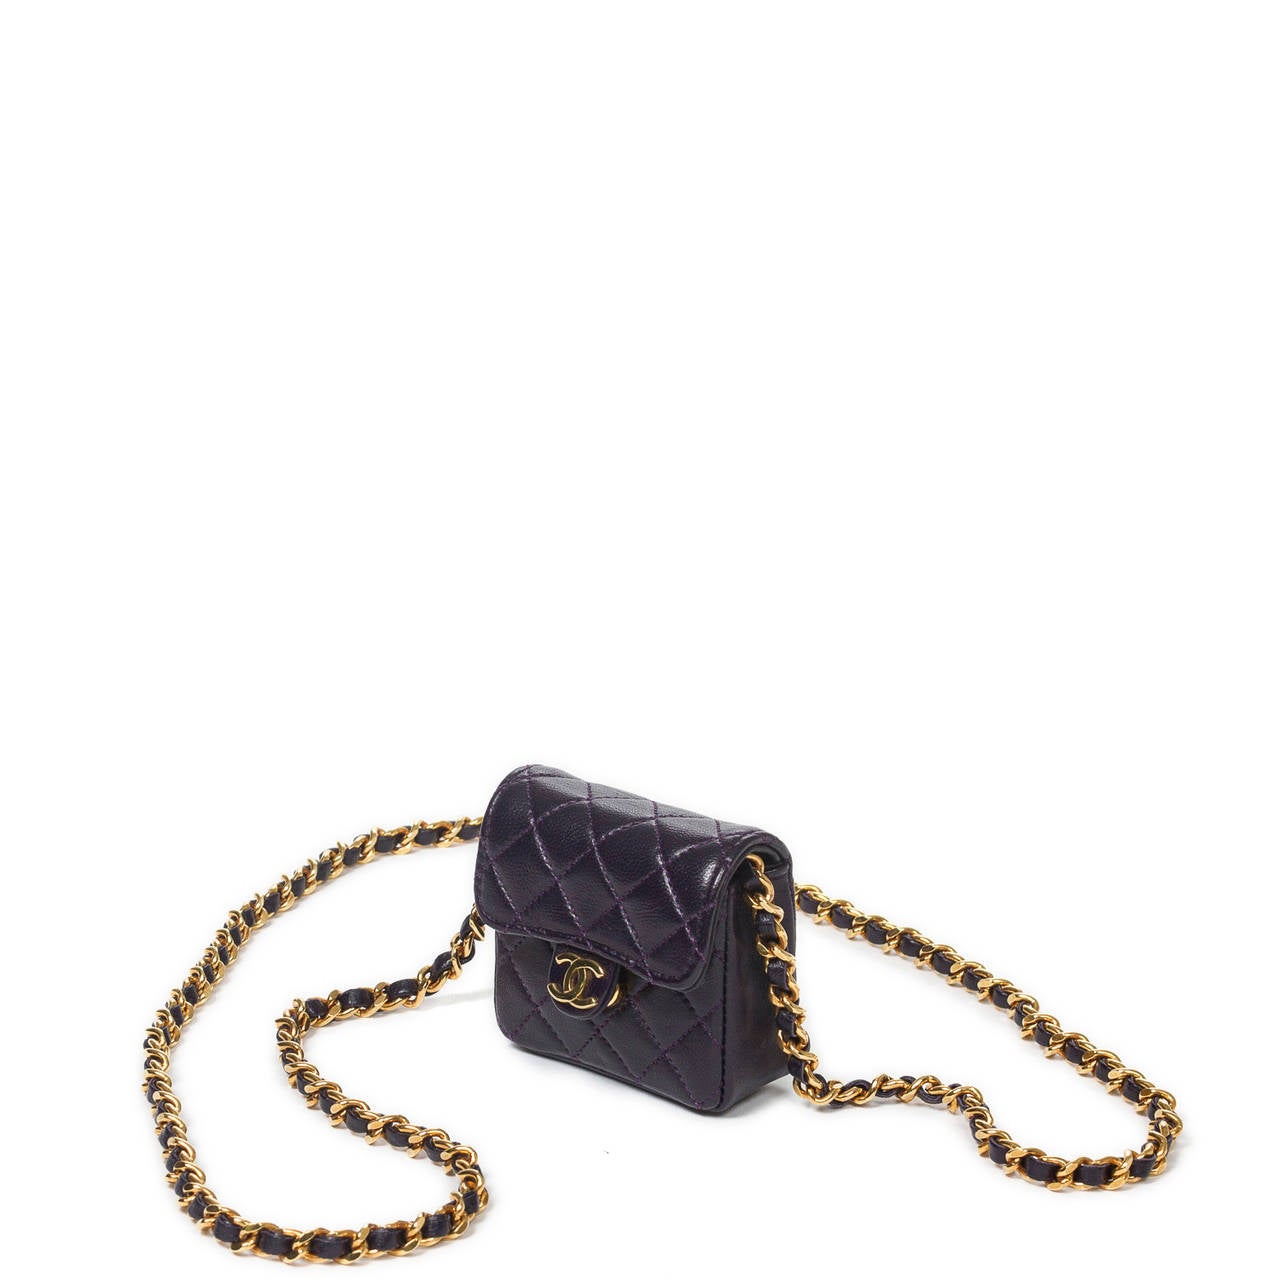 Necklace/shoulder bag Mini Timeless in dark purple quilted leather with gold tone chain strap interlaced with leather. Box, authenticity sticker and card included. Model from 1989 to 1991. Perfect condition.